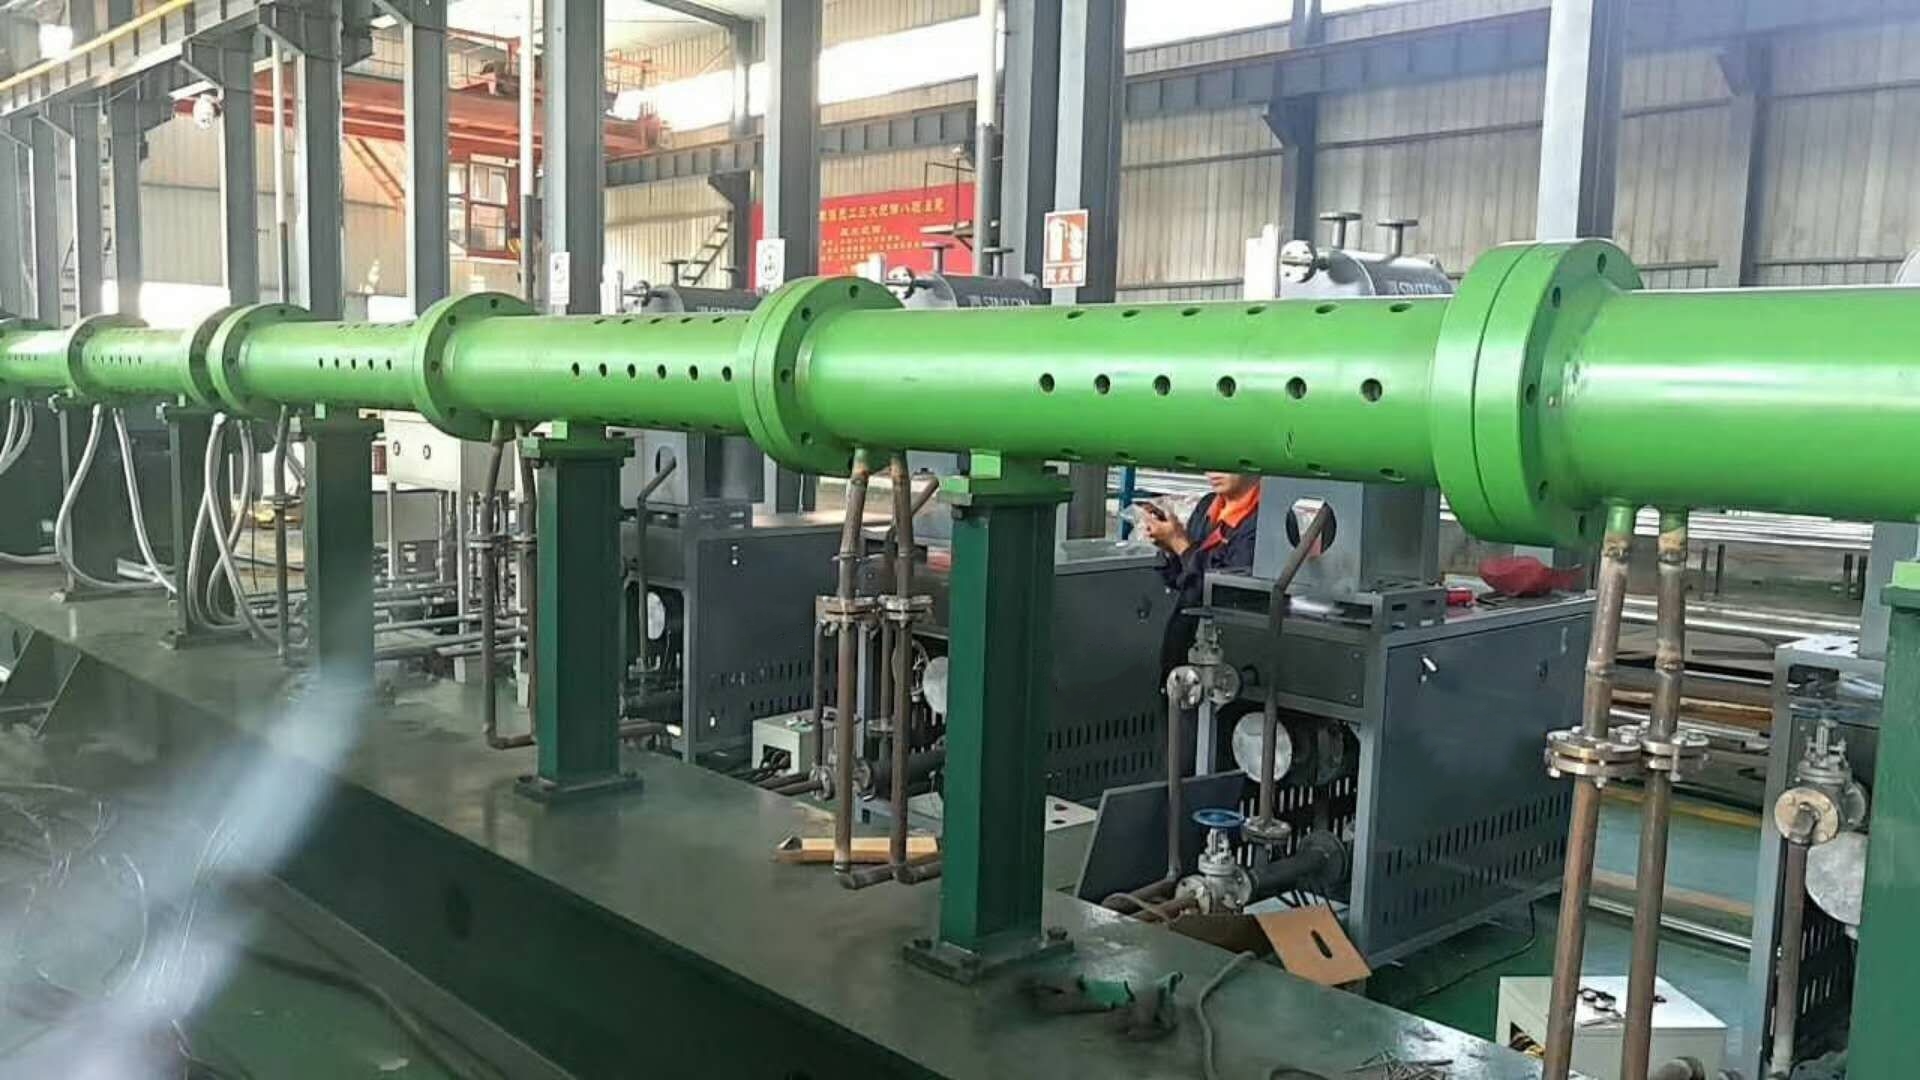 drying room thermal oil heater manufacturers